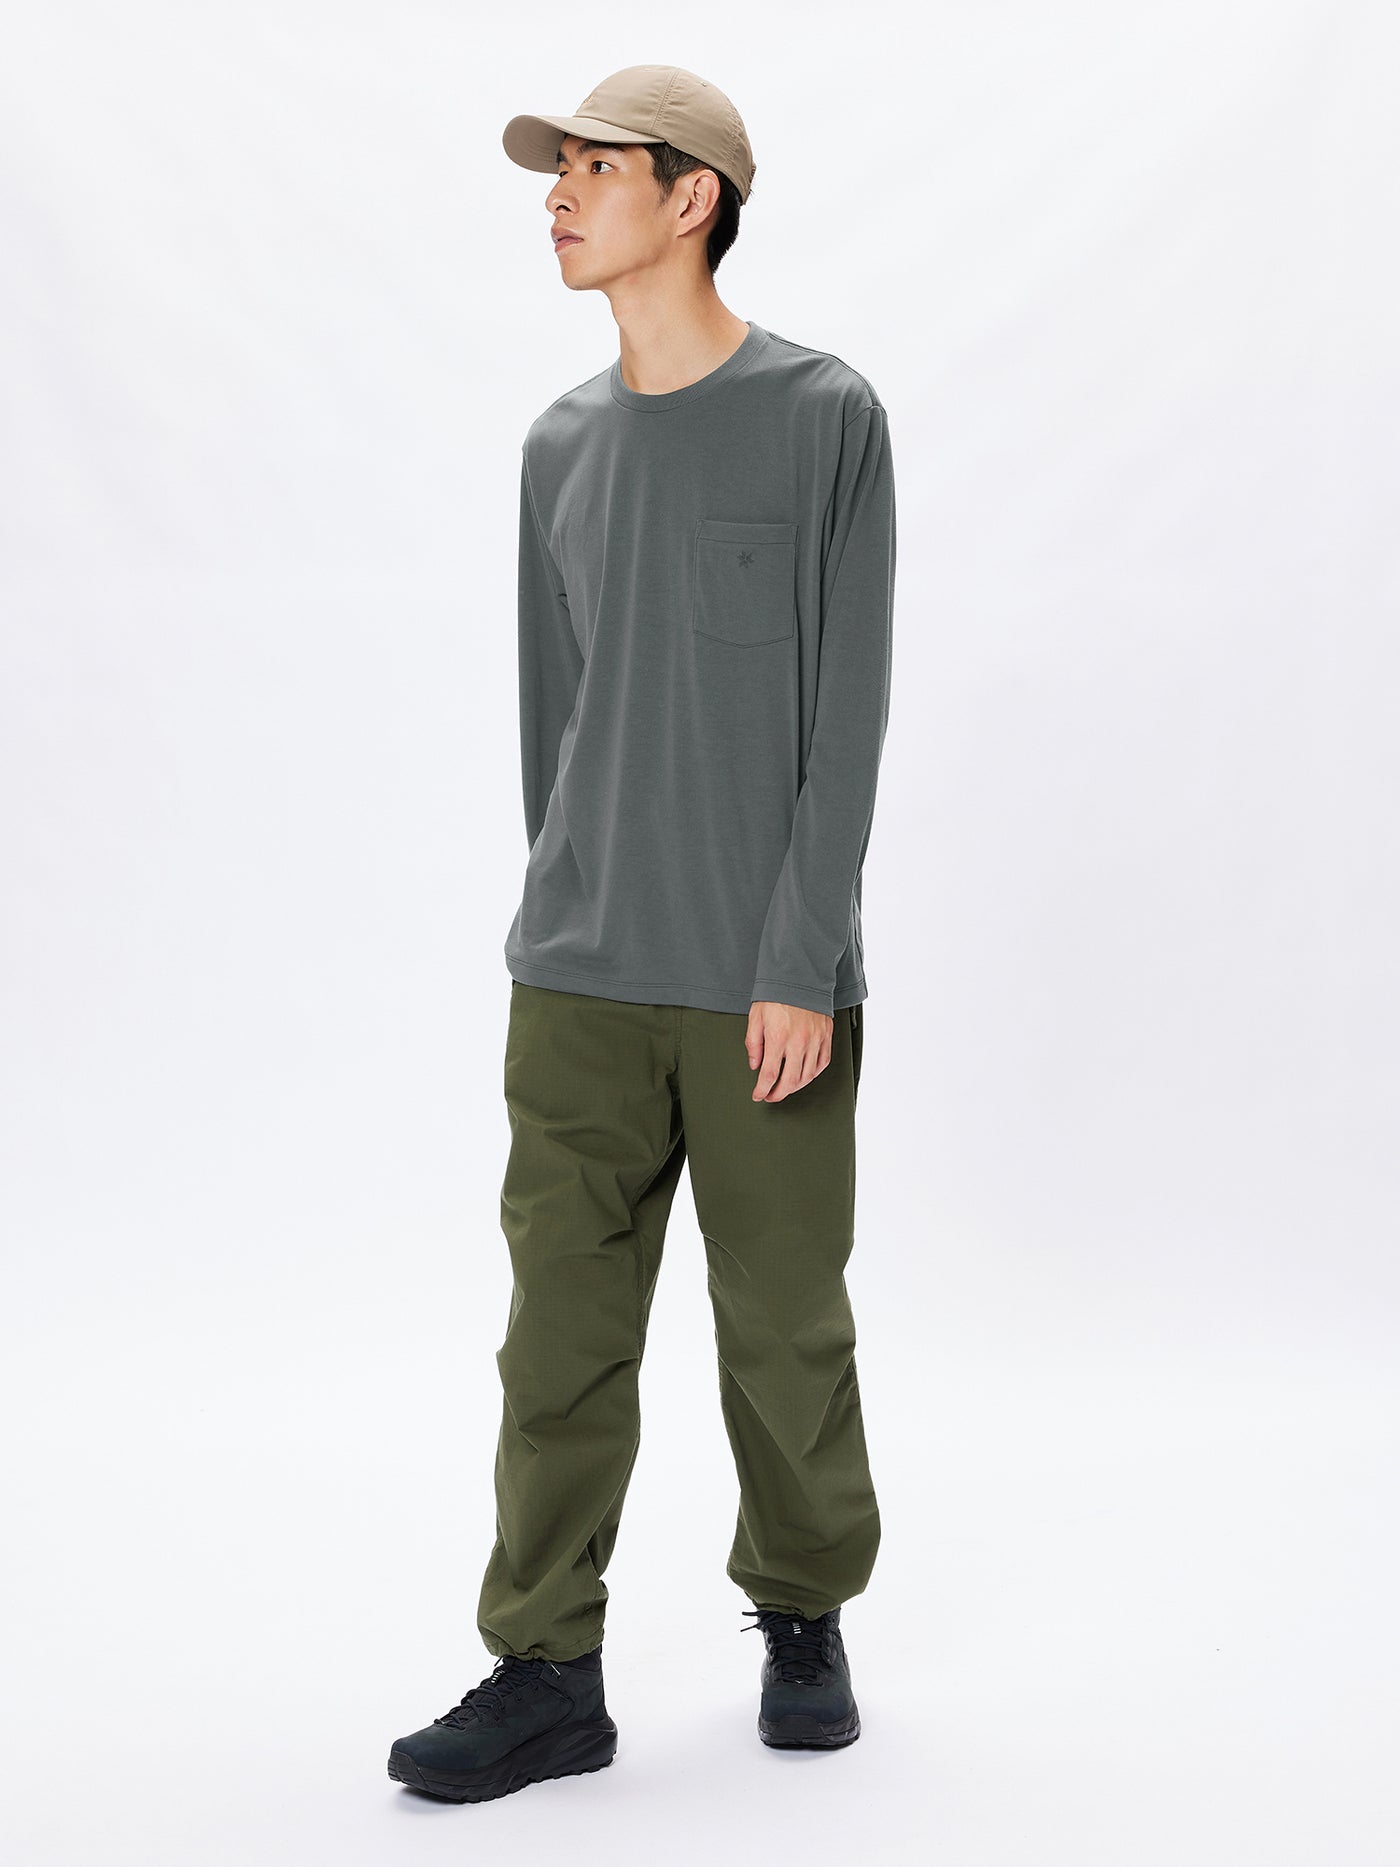 Model: Height 182cm | Wearing: OLIVE DRAB / 3